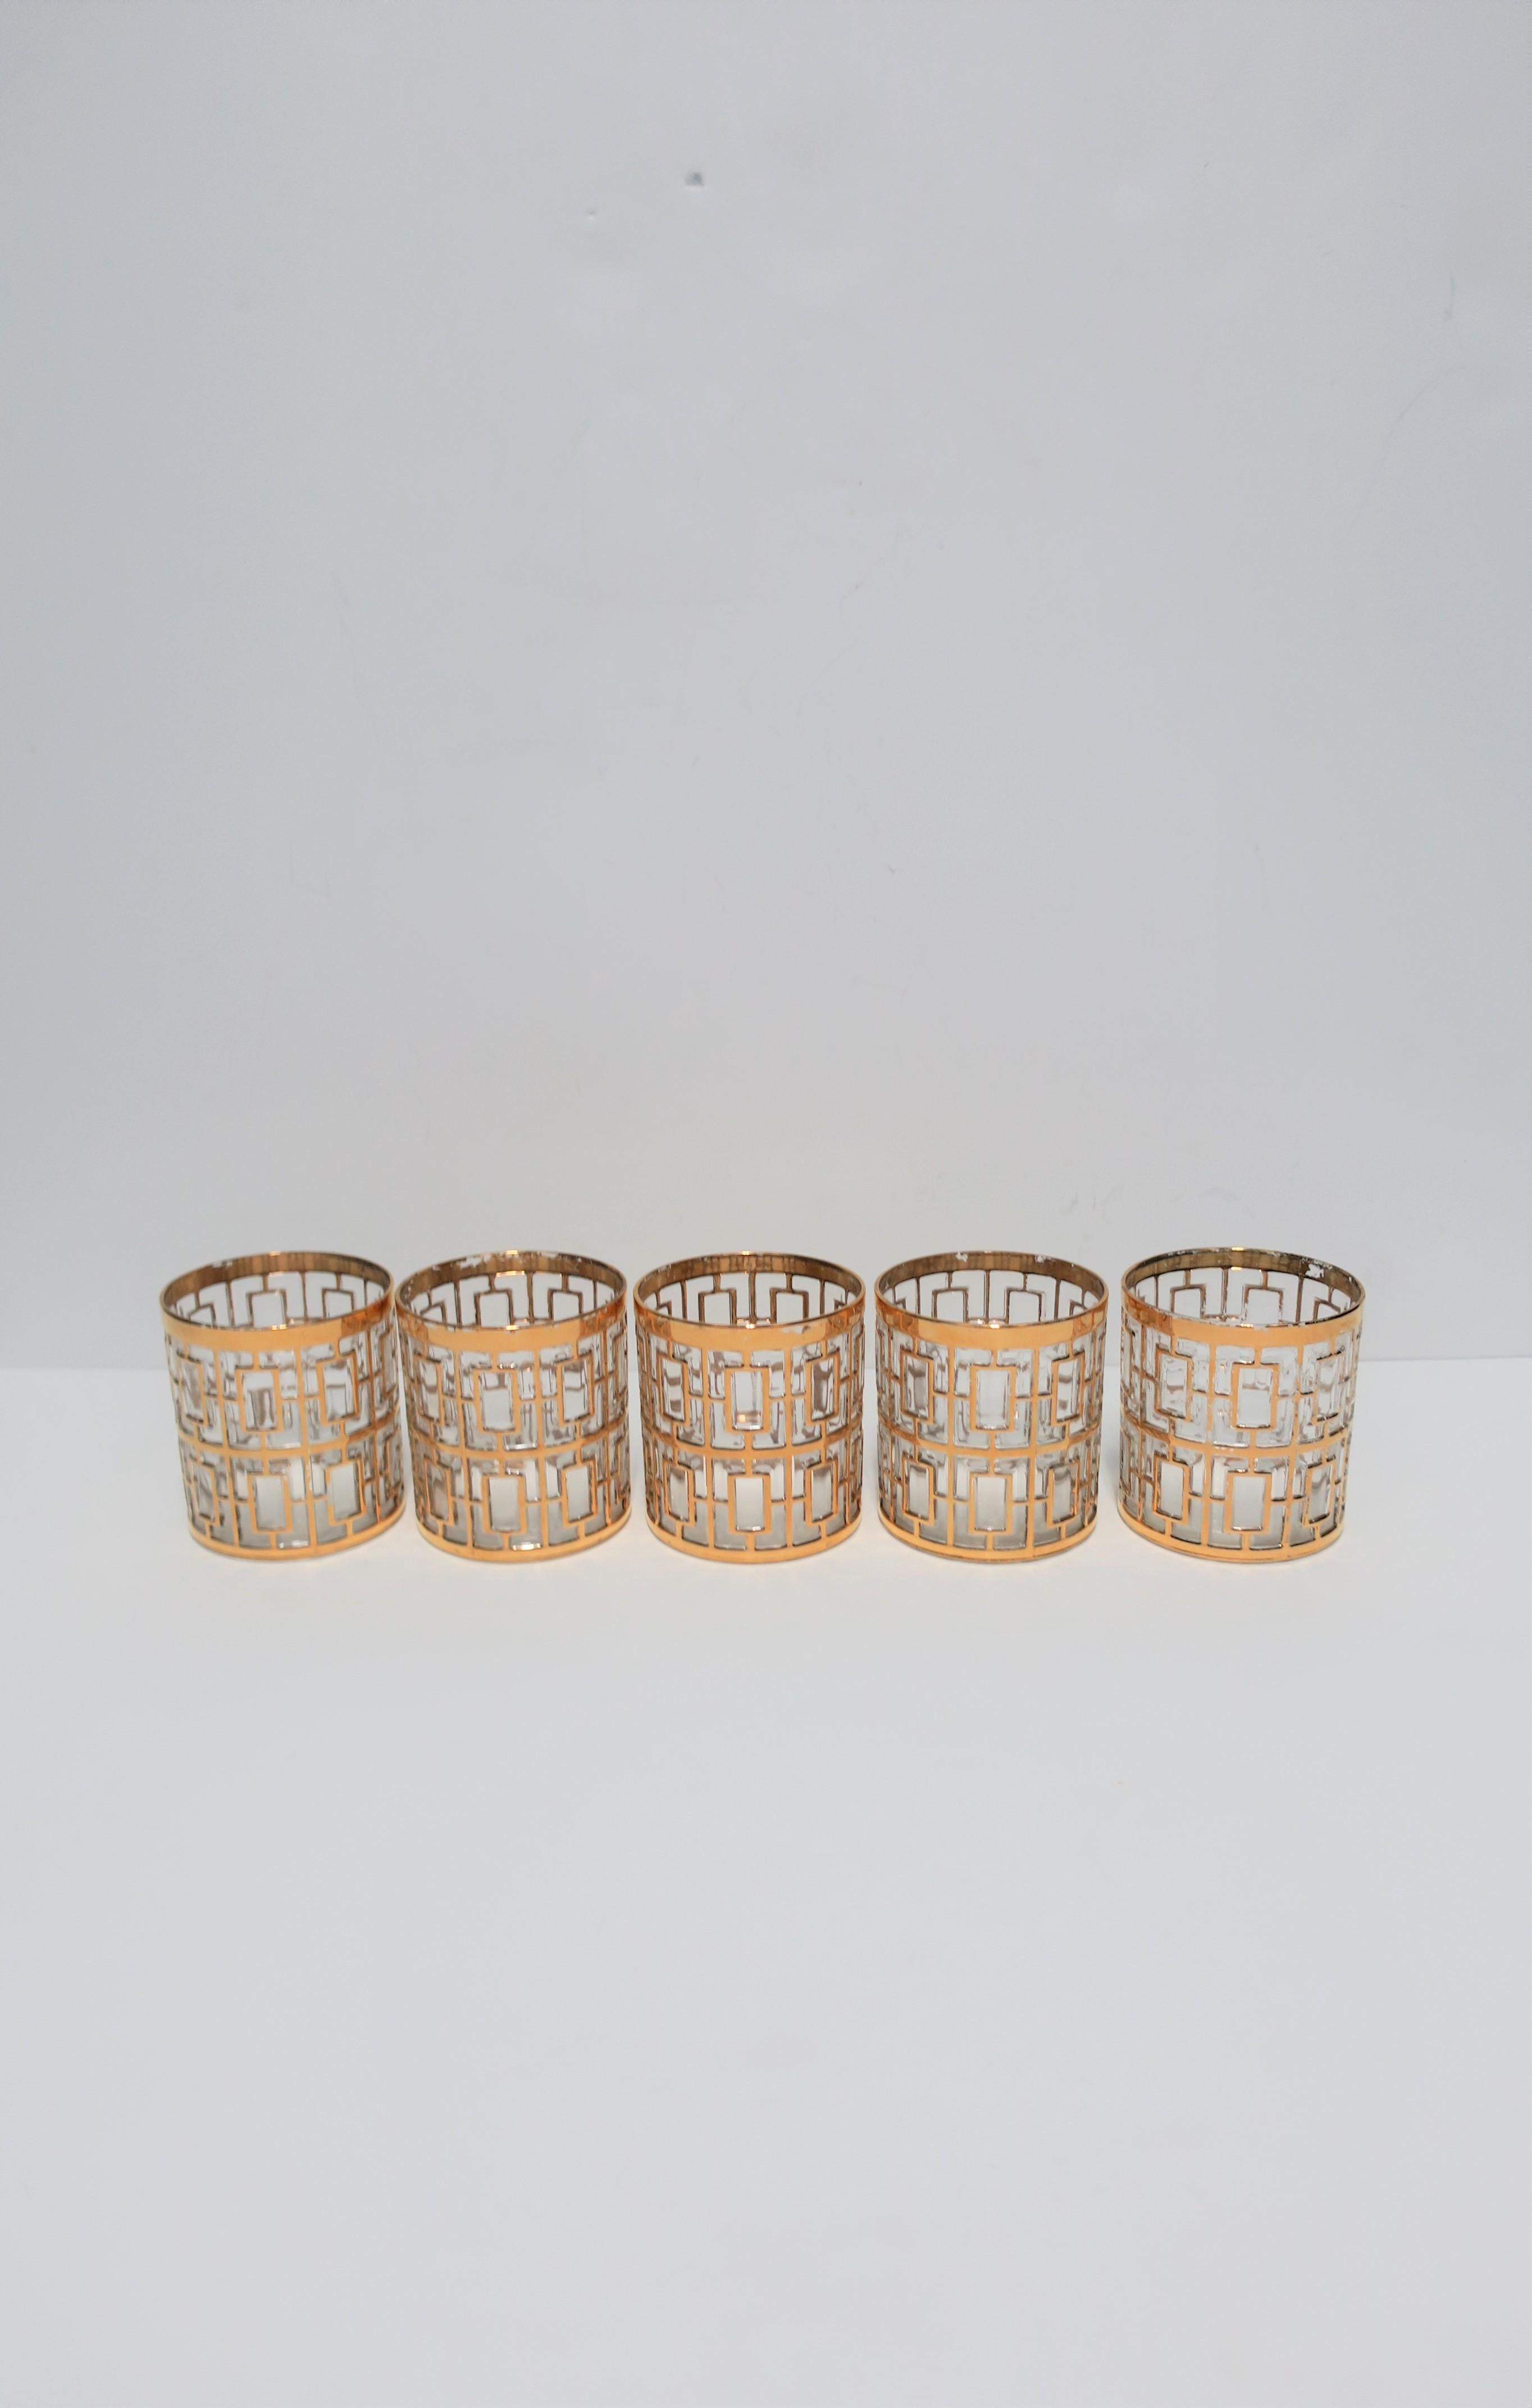 A beautiful vintage set of five (5) low-ball rock's glass in the Hollywood Regency style, circa 1960s. Glasses have a 22-karat gold-plate overlay on clear glass in the 'Shoji' screen pattern, which was signature to the maker, Imperial Glass. With